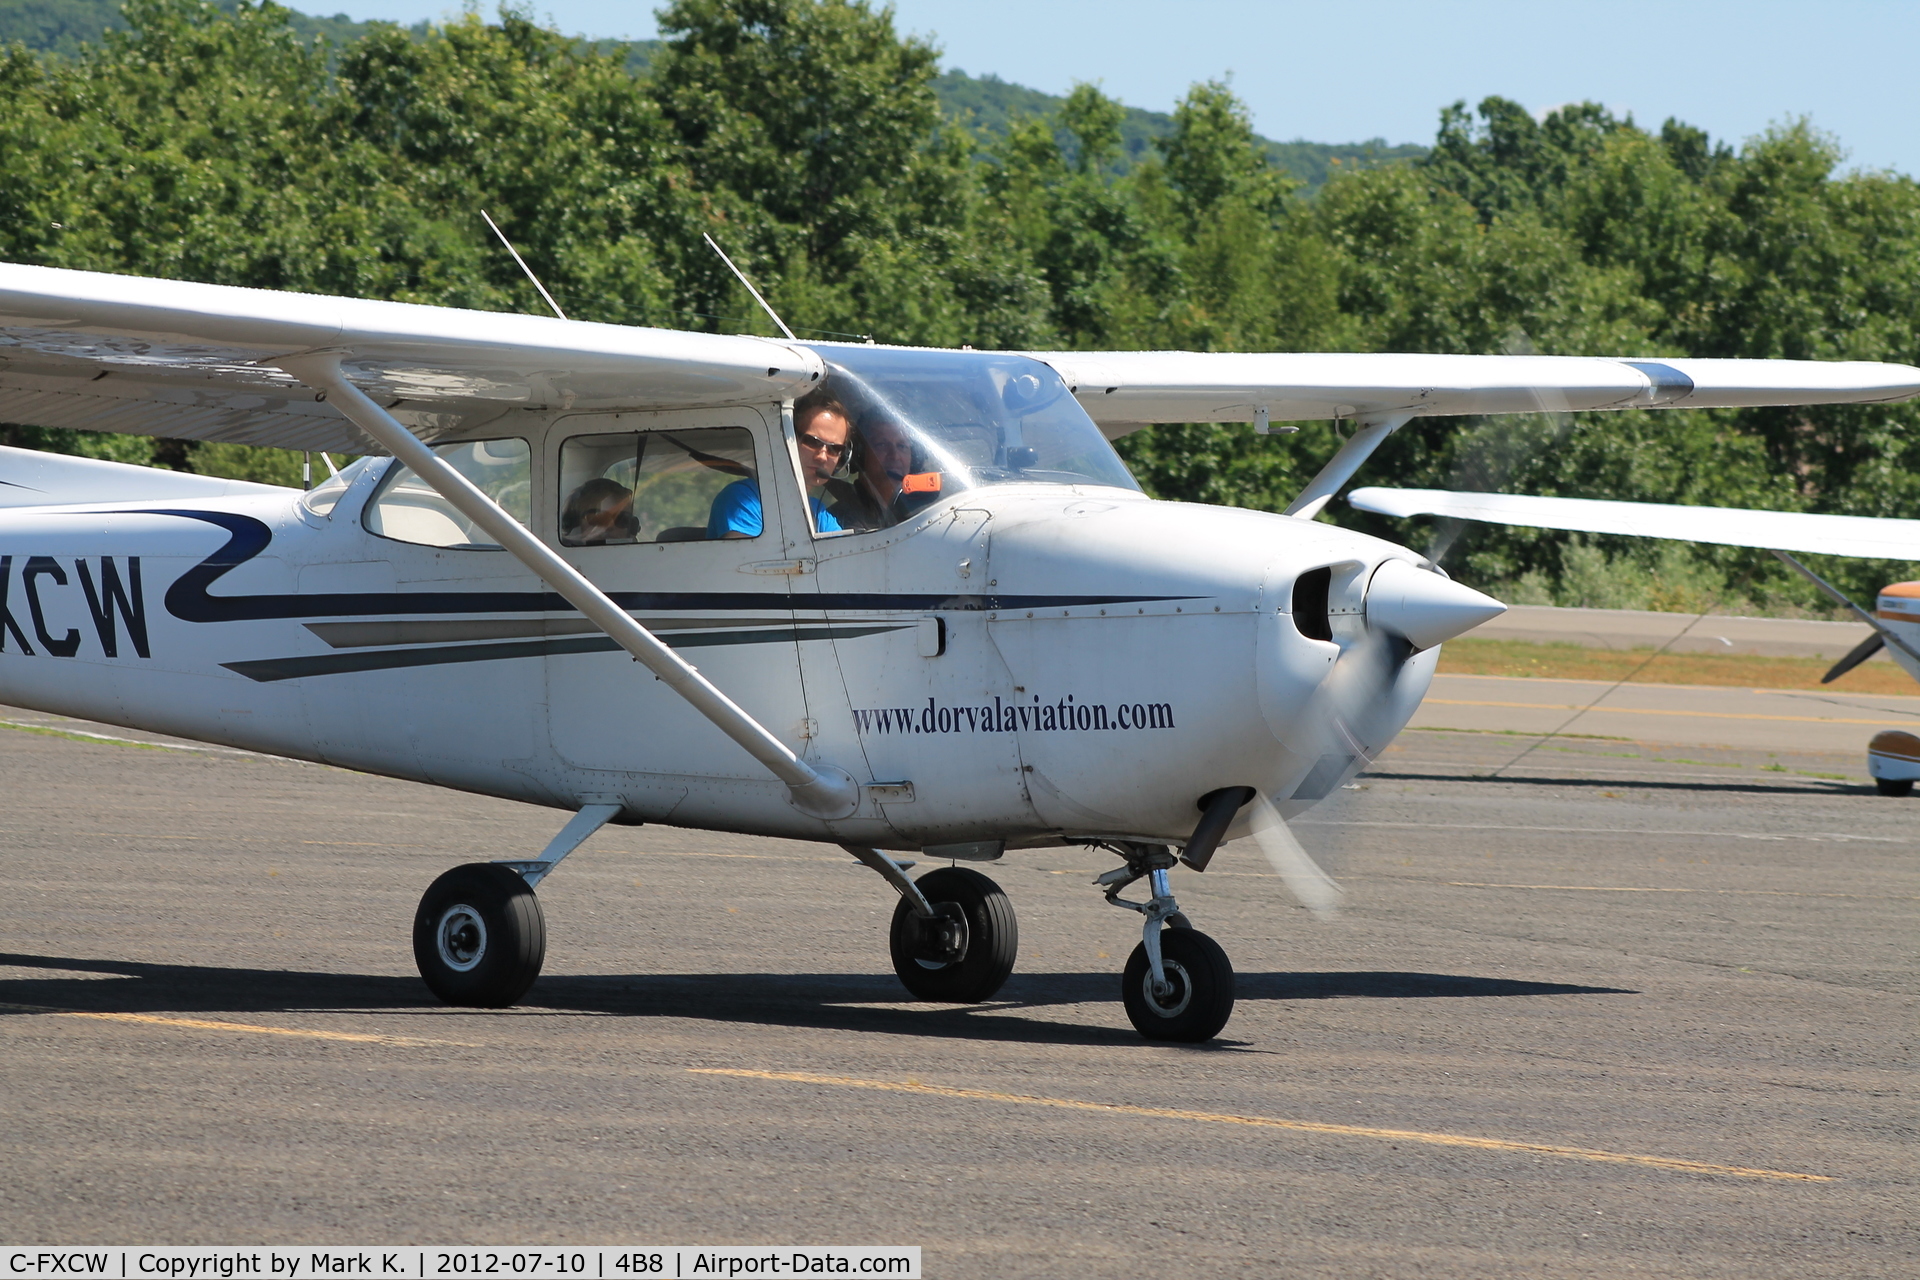 C-FXCW, 1968 Cessna 172K Skyhawk C/N 17257184, C-FXCW taxiing into the ramp after its flight from Burlington, VT (KBTV).